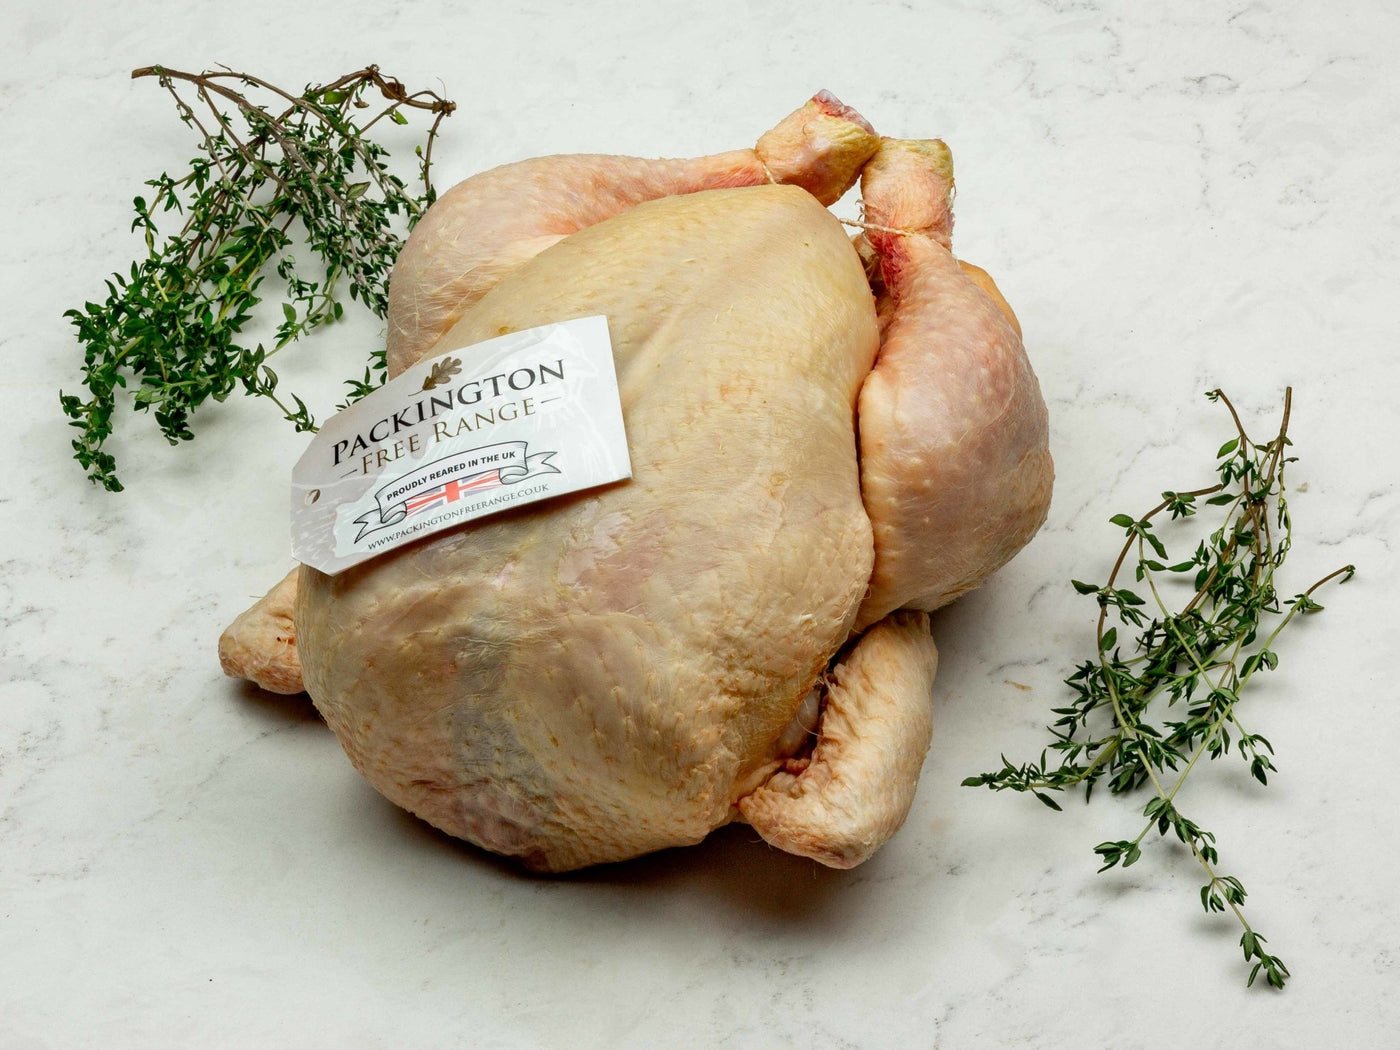 Whole Packington Free Range Chicken - Chicken - Thomas Joseph Butchery - Ethical Dry-Aged Meat The Best Steak UK Thomas Joseph Butchery